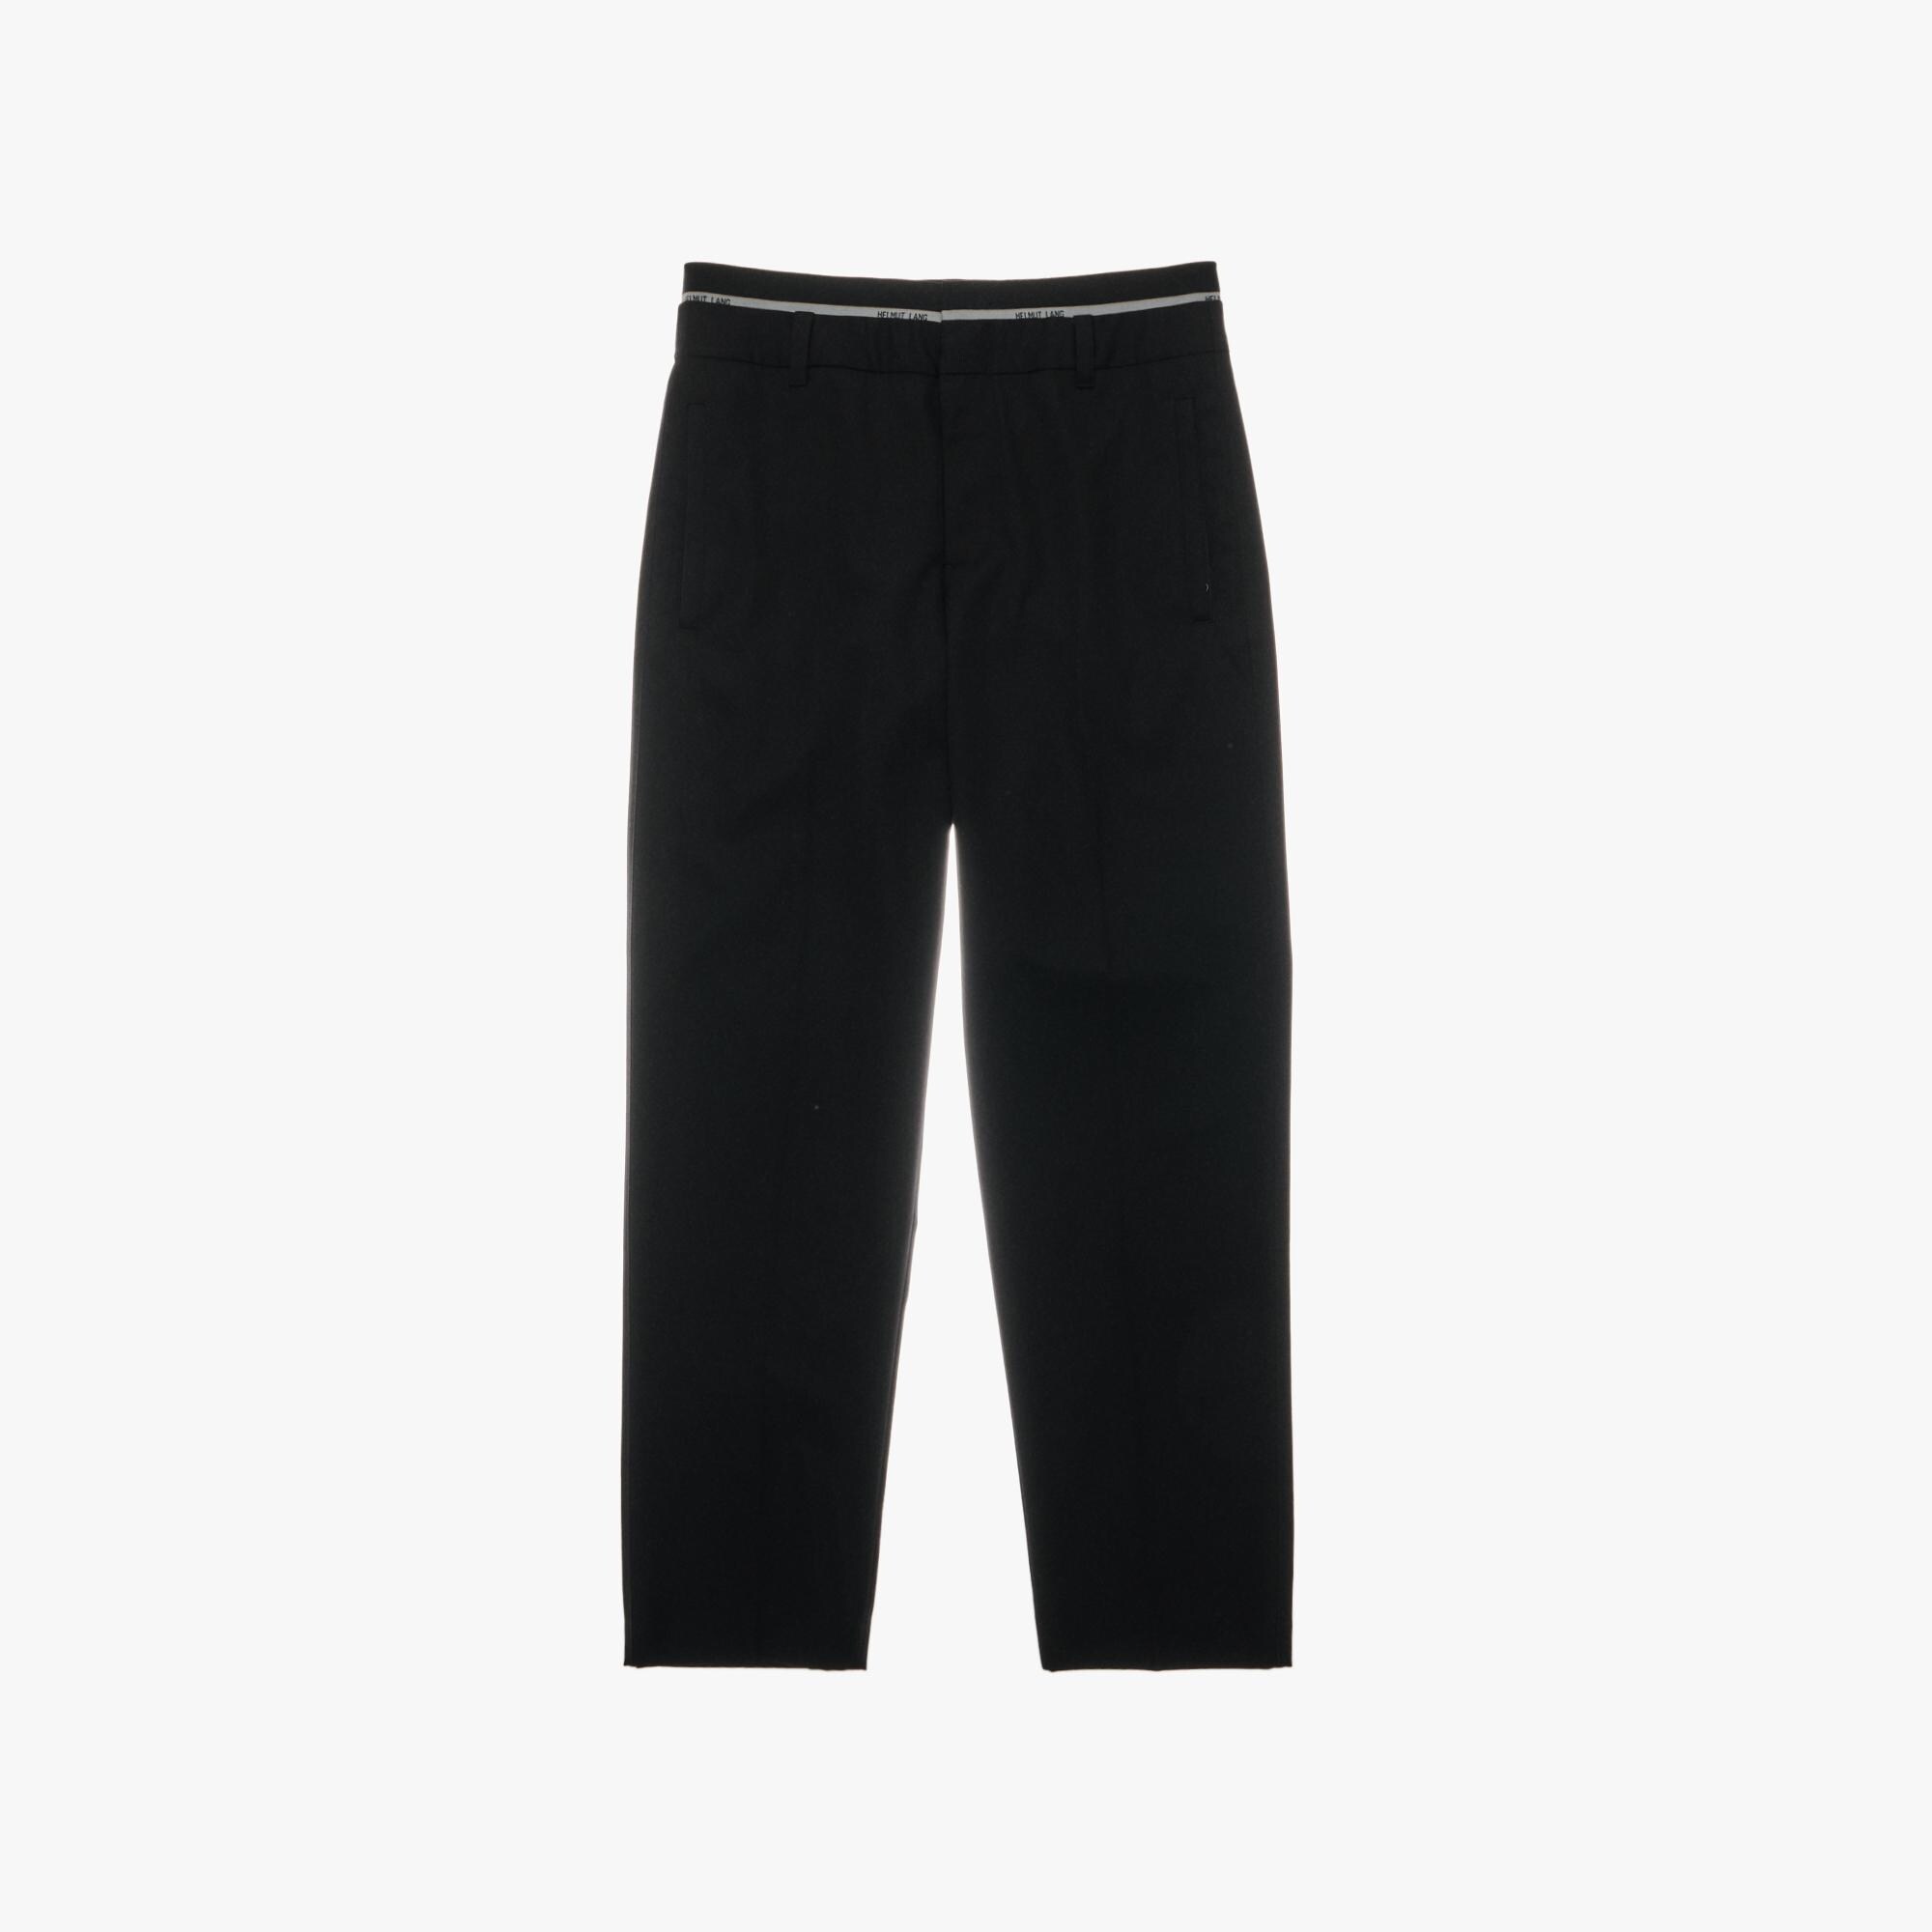 WWW.HELMUTLANG.COM | Finest Clothing and Luxury Goods for Women and Men